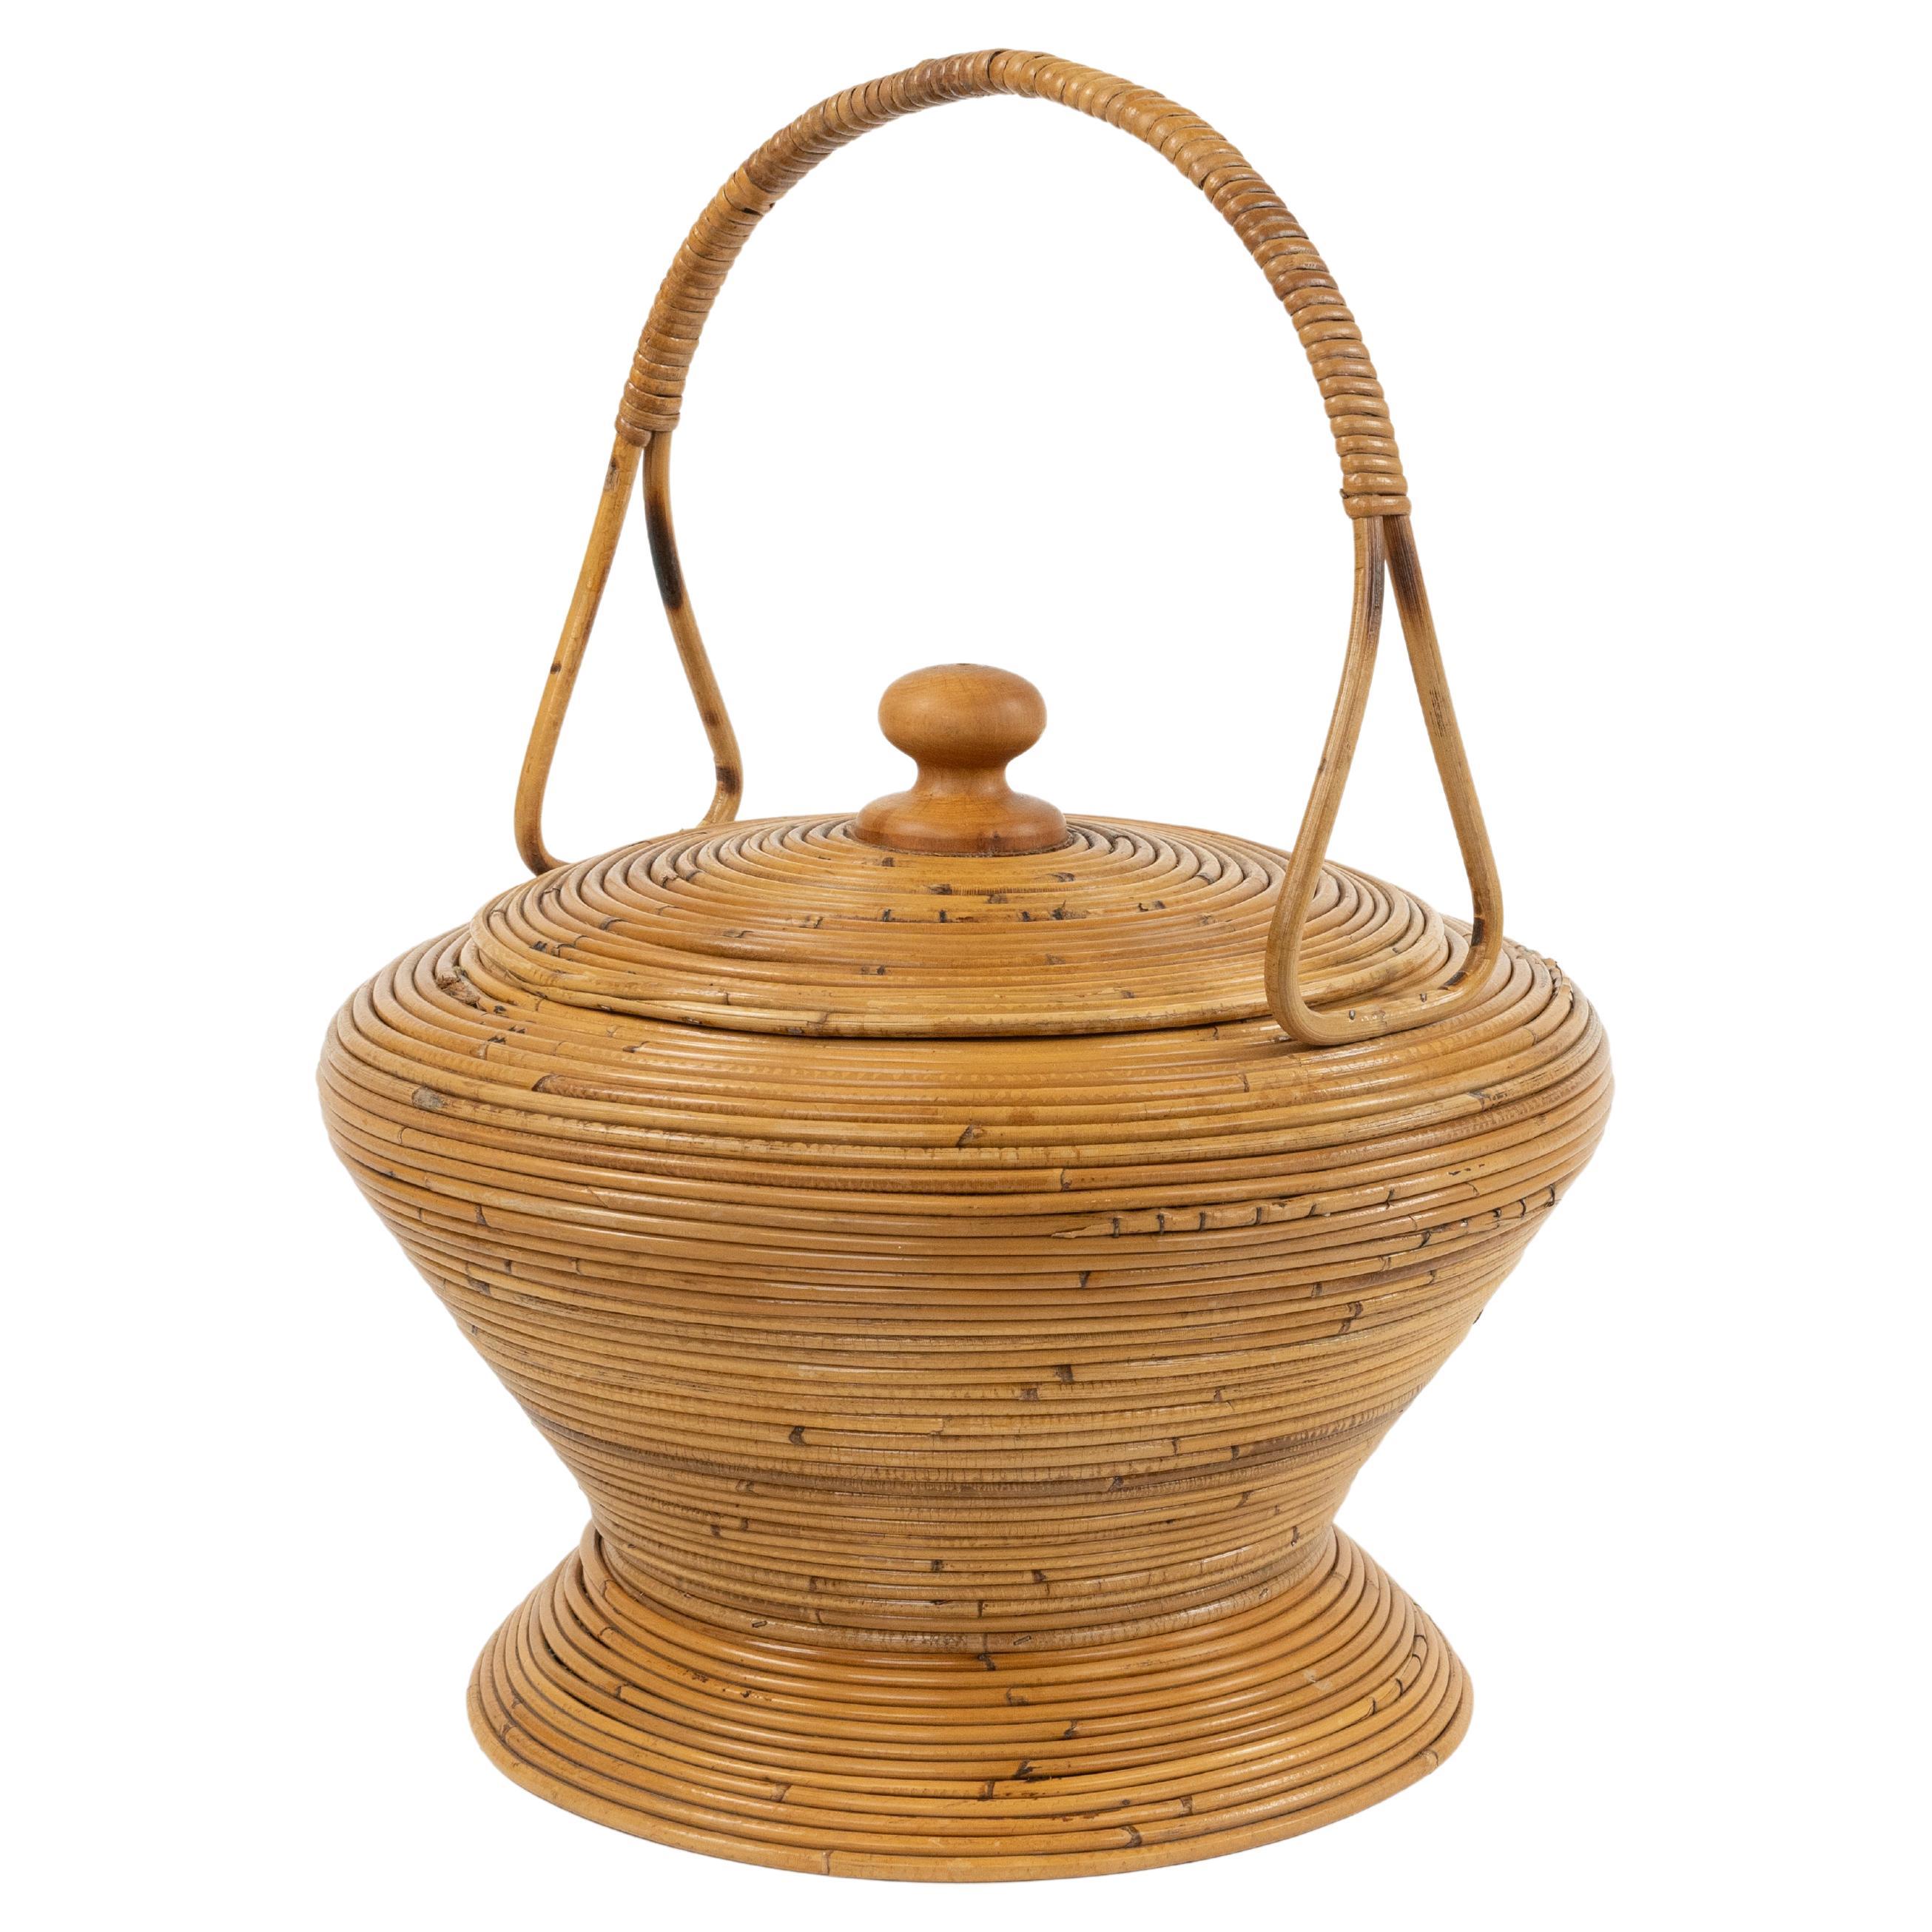 Midcentury Rattan Decorative Basket by Vivai Del Sud, Italy 1960s For Sale